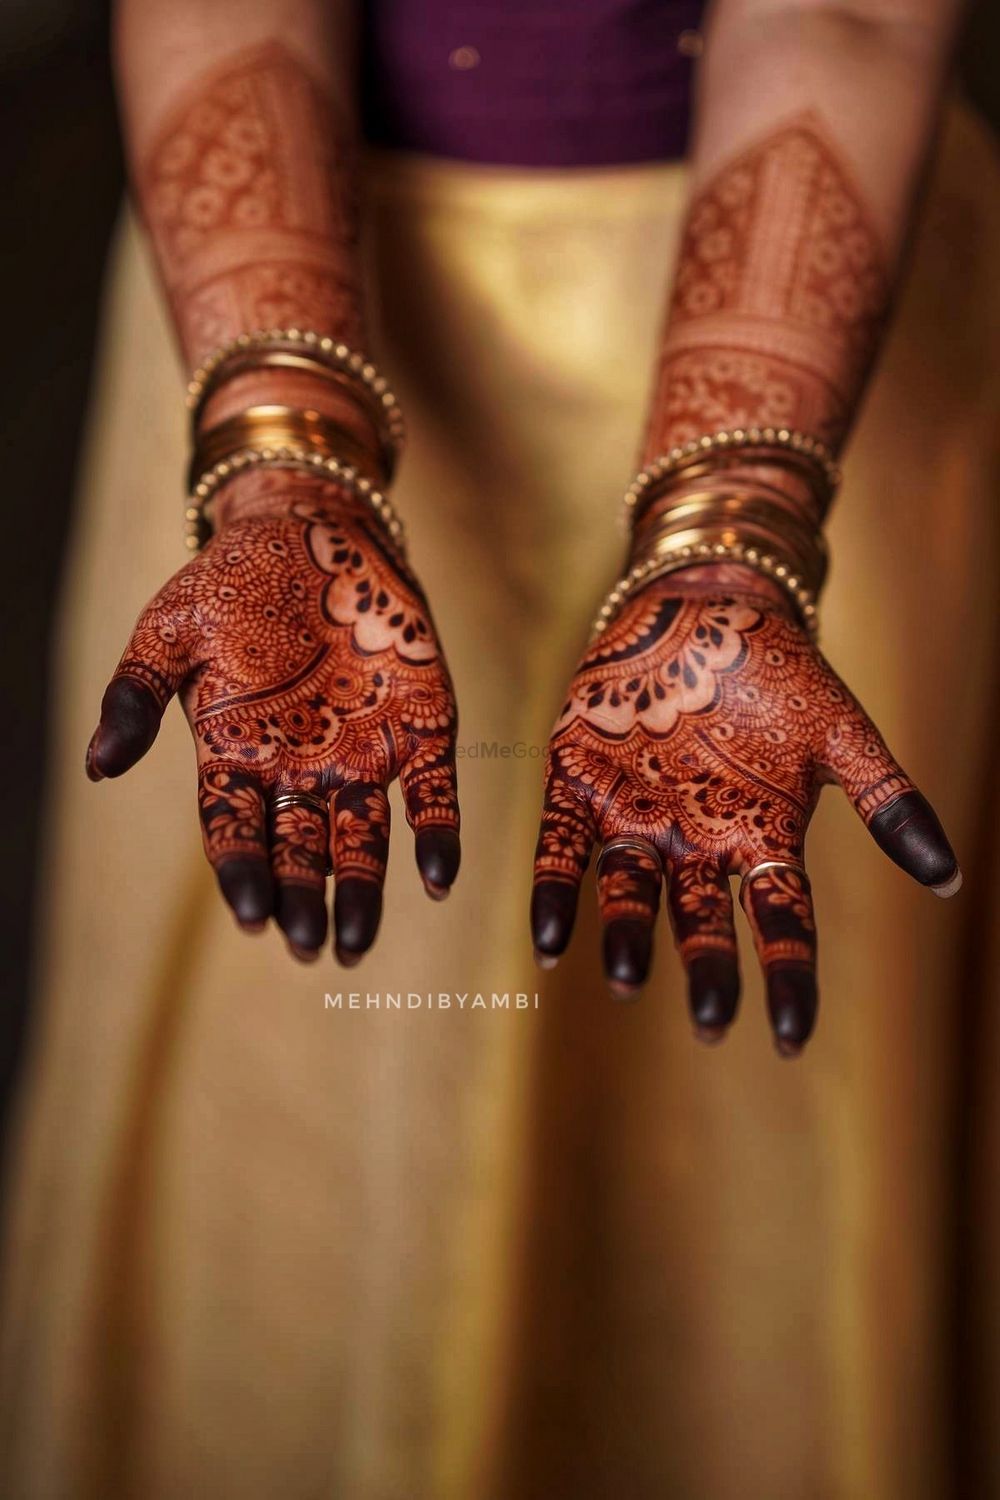 Photo From recent work - By Mehndi by Ambi